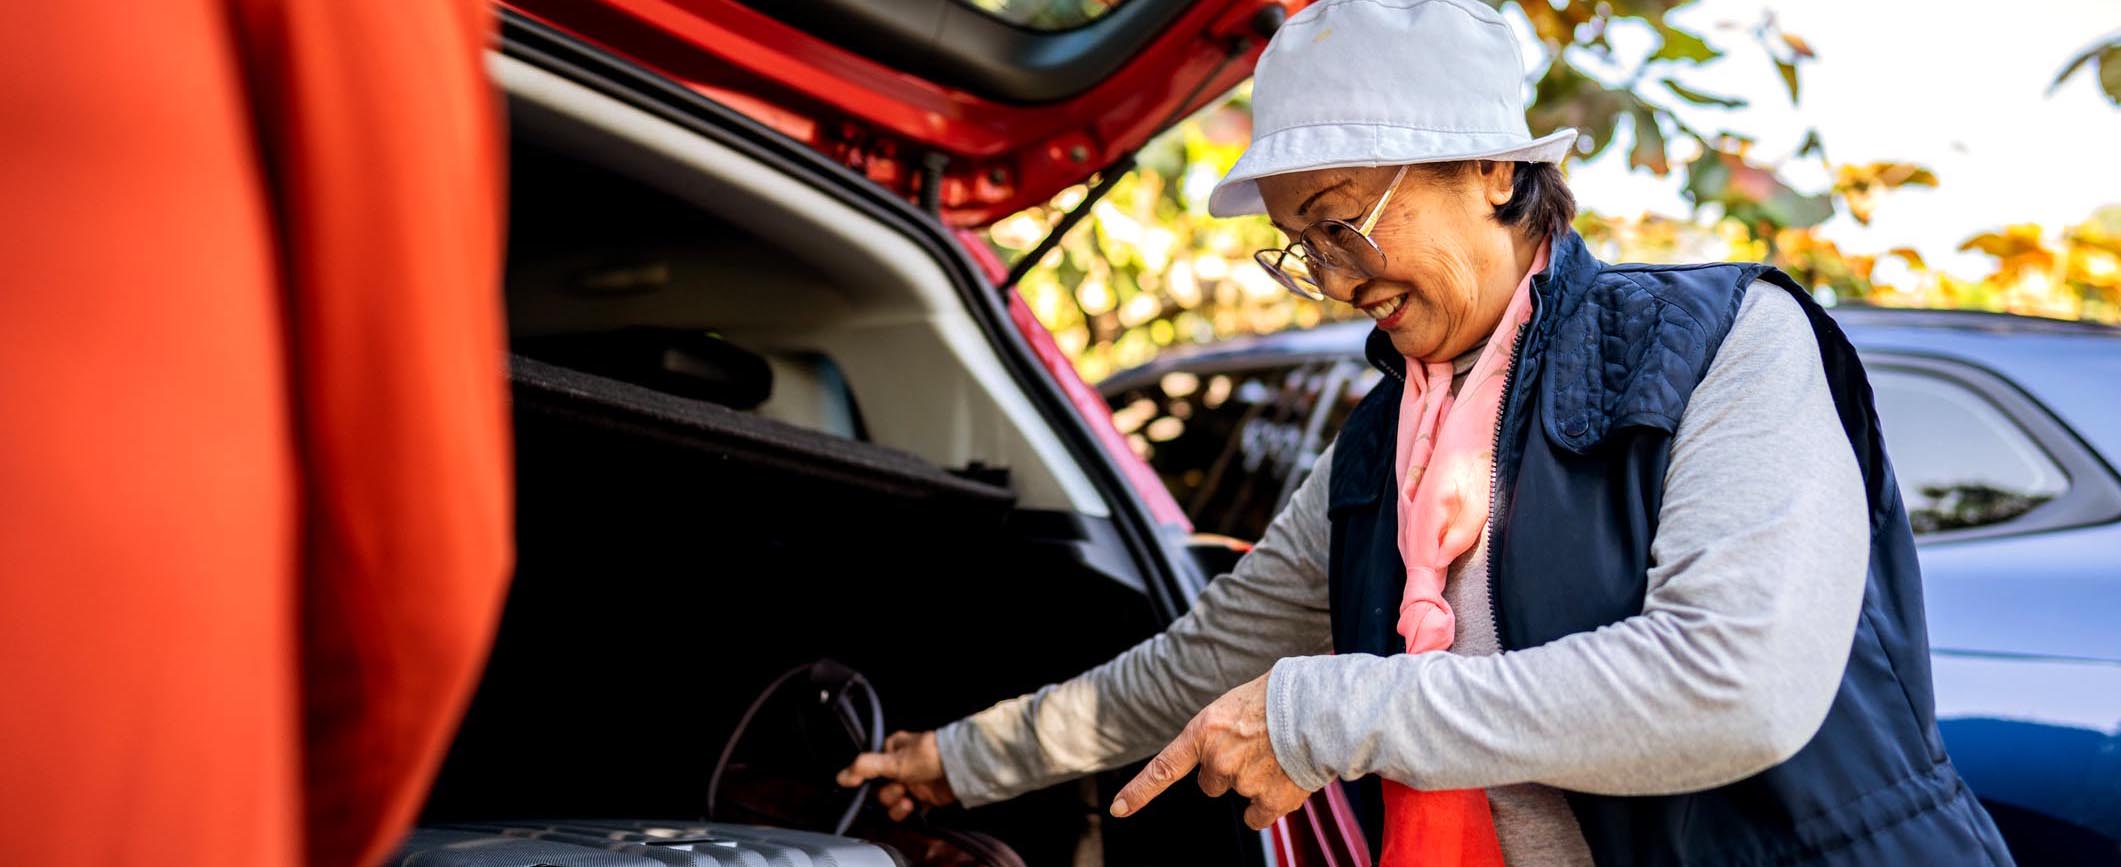 A woman smiles while loading a bag into the trunk of her car.